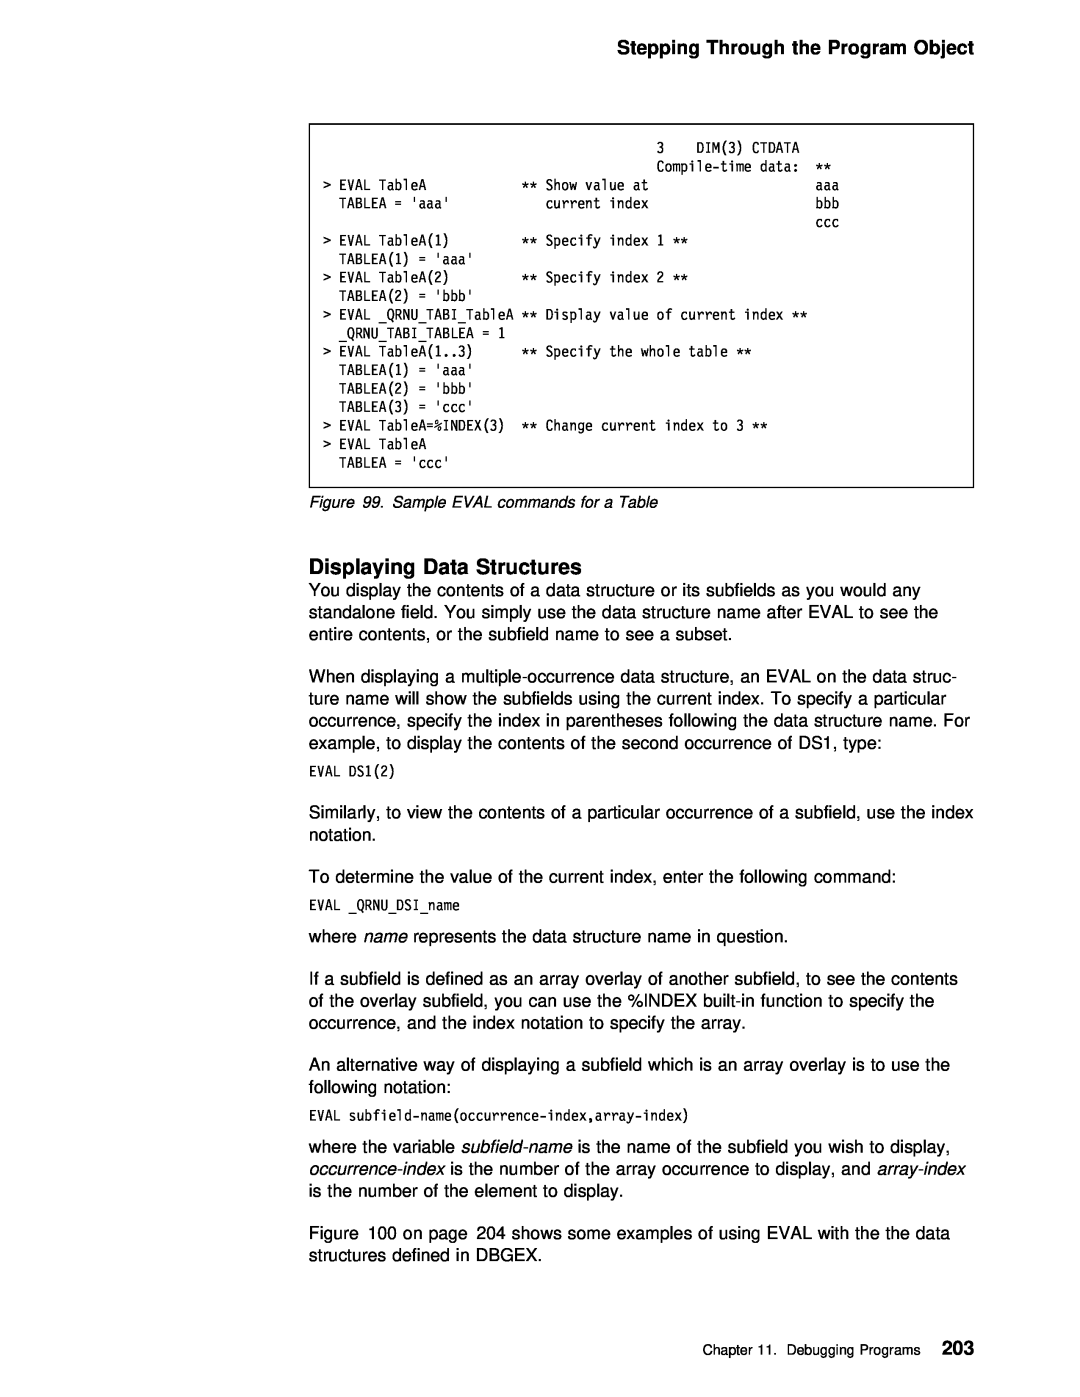 IBM AS/400 manual Displaying Data Structures, Stepping Through the Program Object 